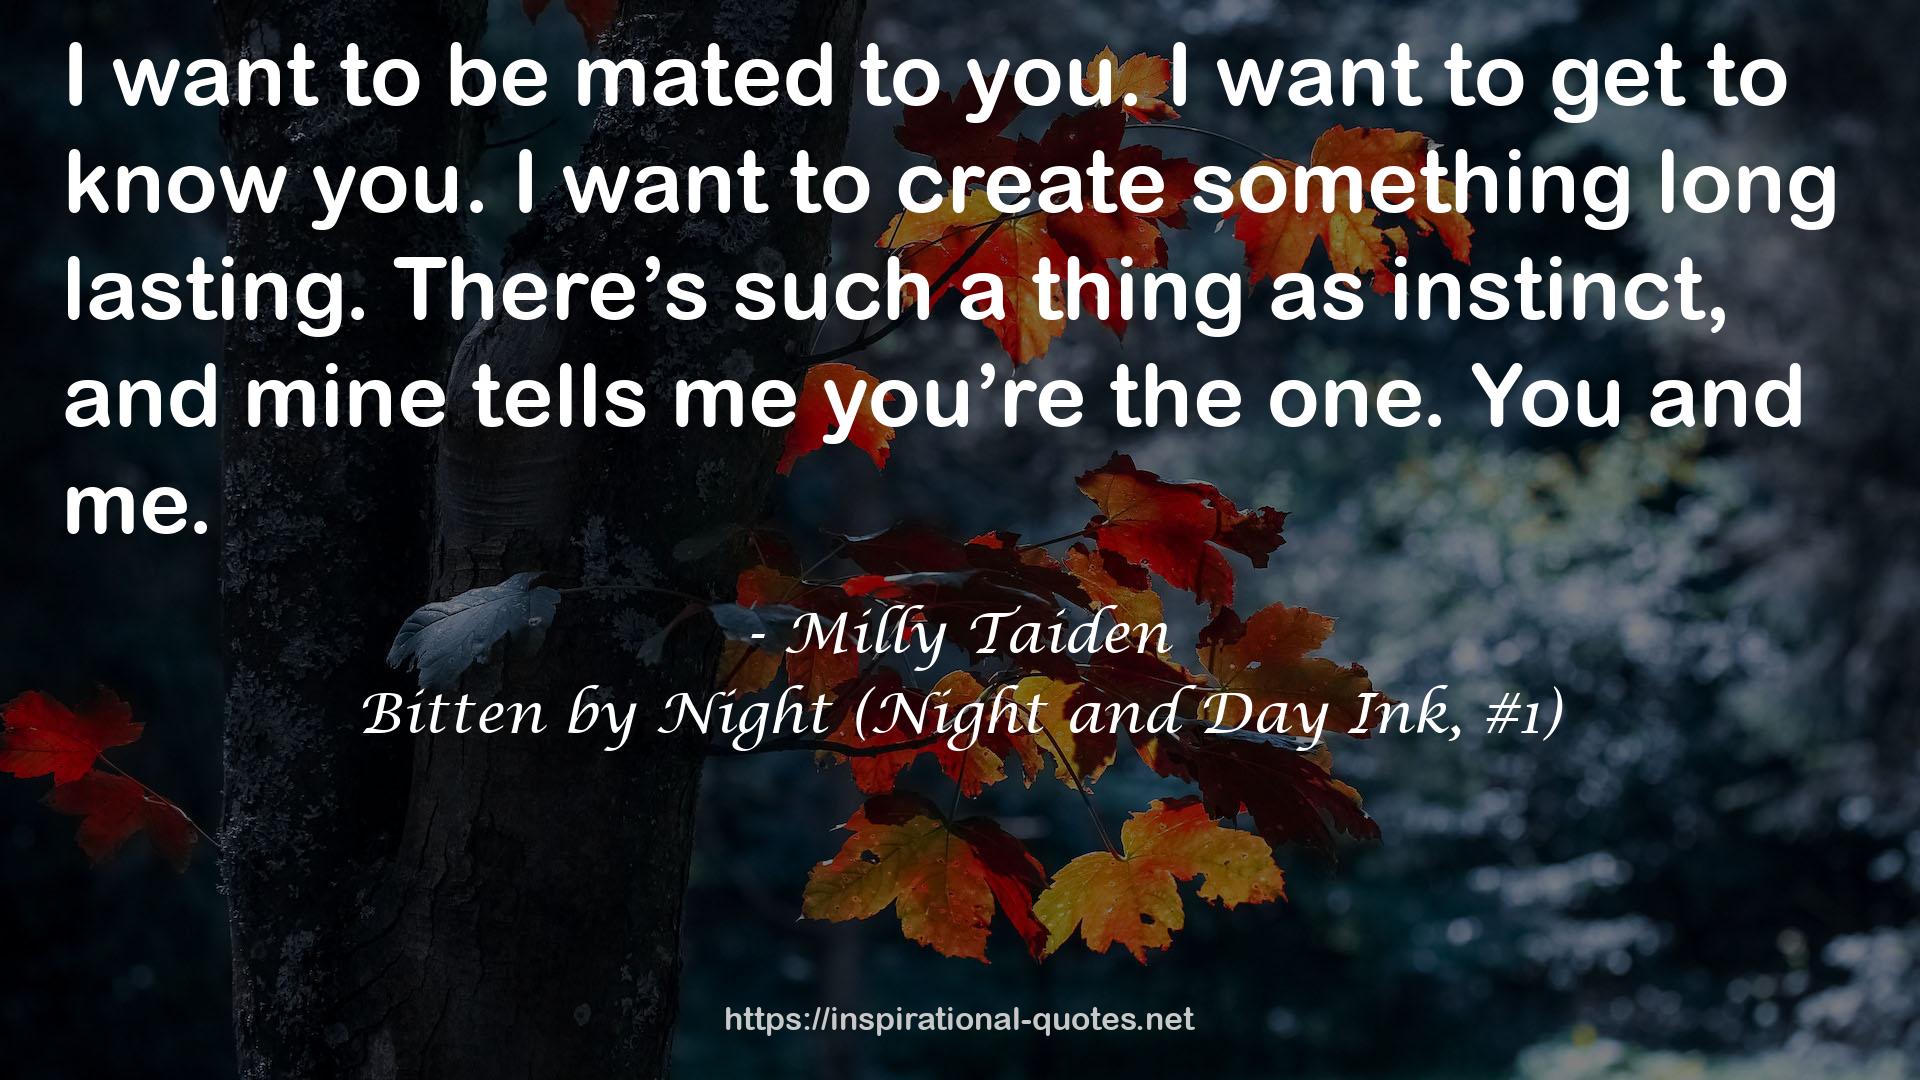 Bitten by Night (Night and Day Ink, #1) QUOTES